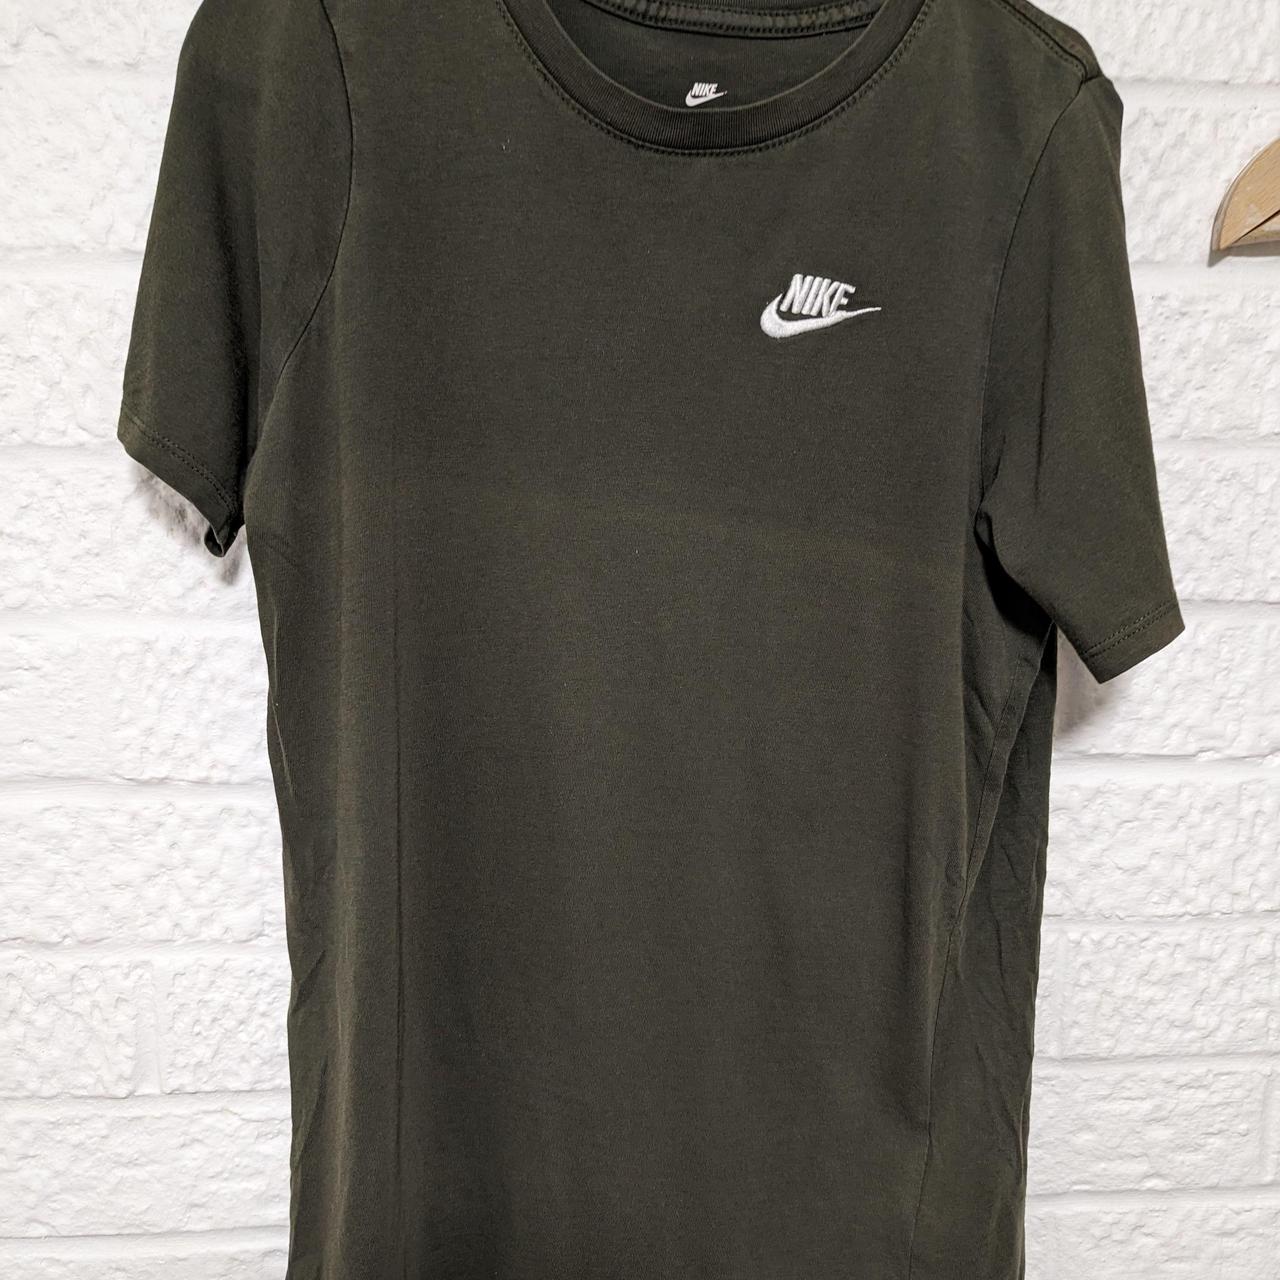 Nike Youth Crew Neck T Shirt - Size L Youth - Green... - Depop